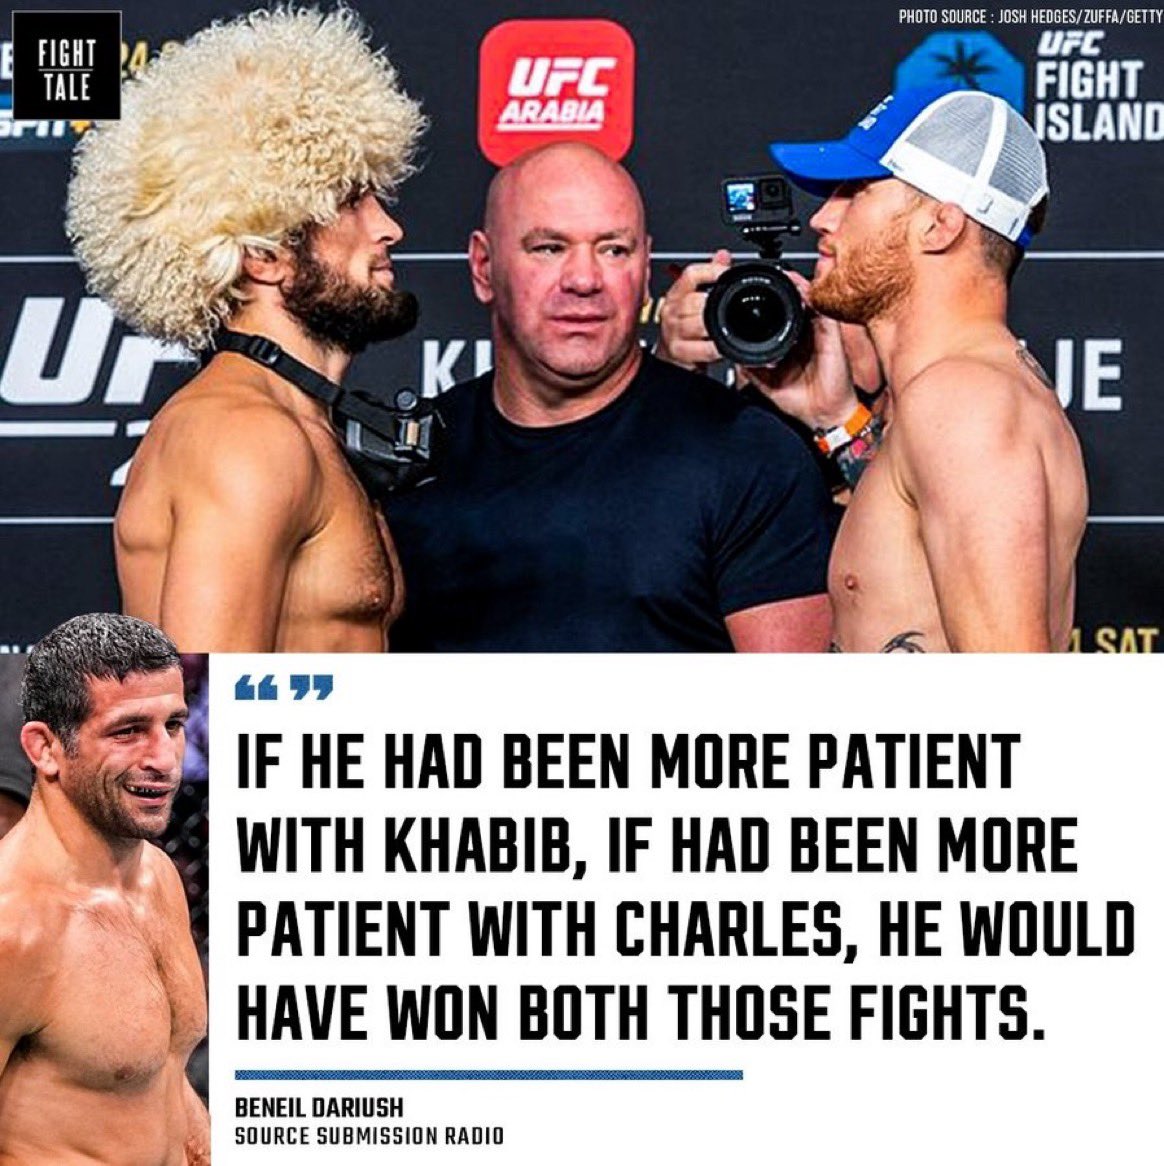 Charles Oliveira by whatever he wants now